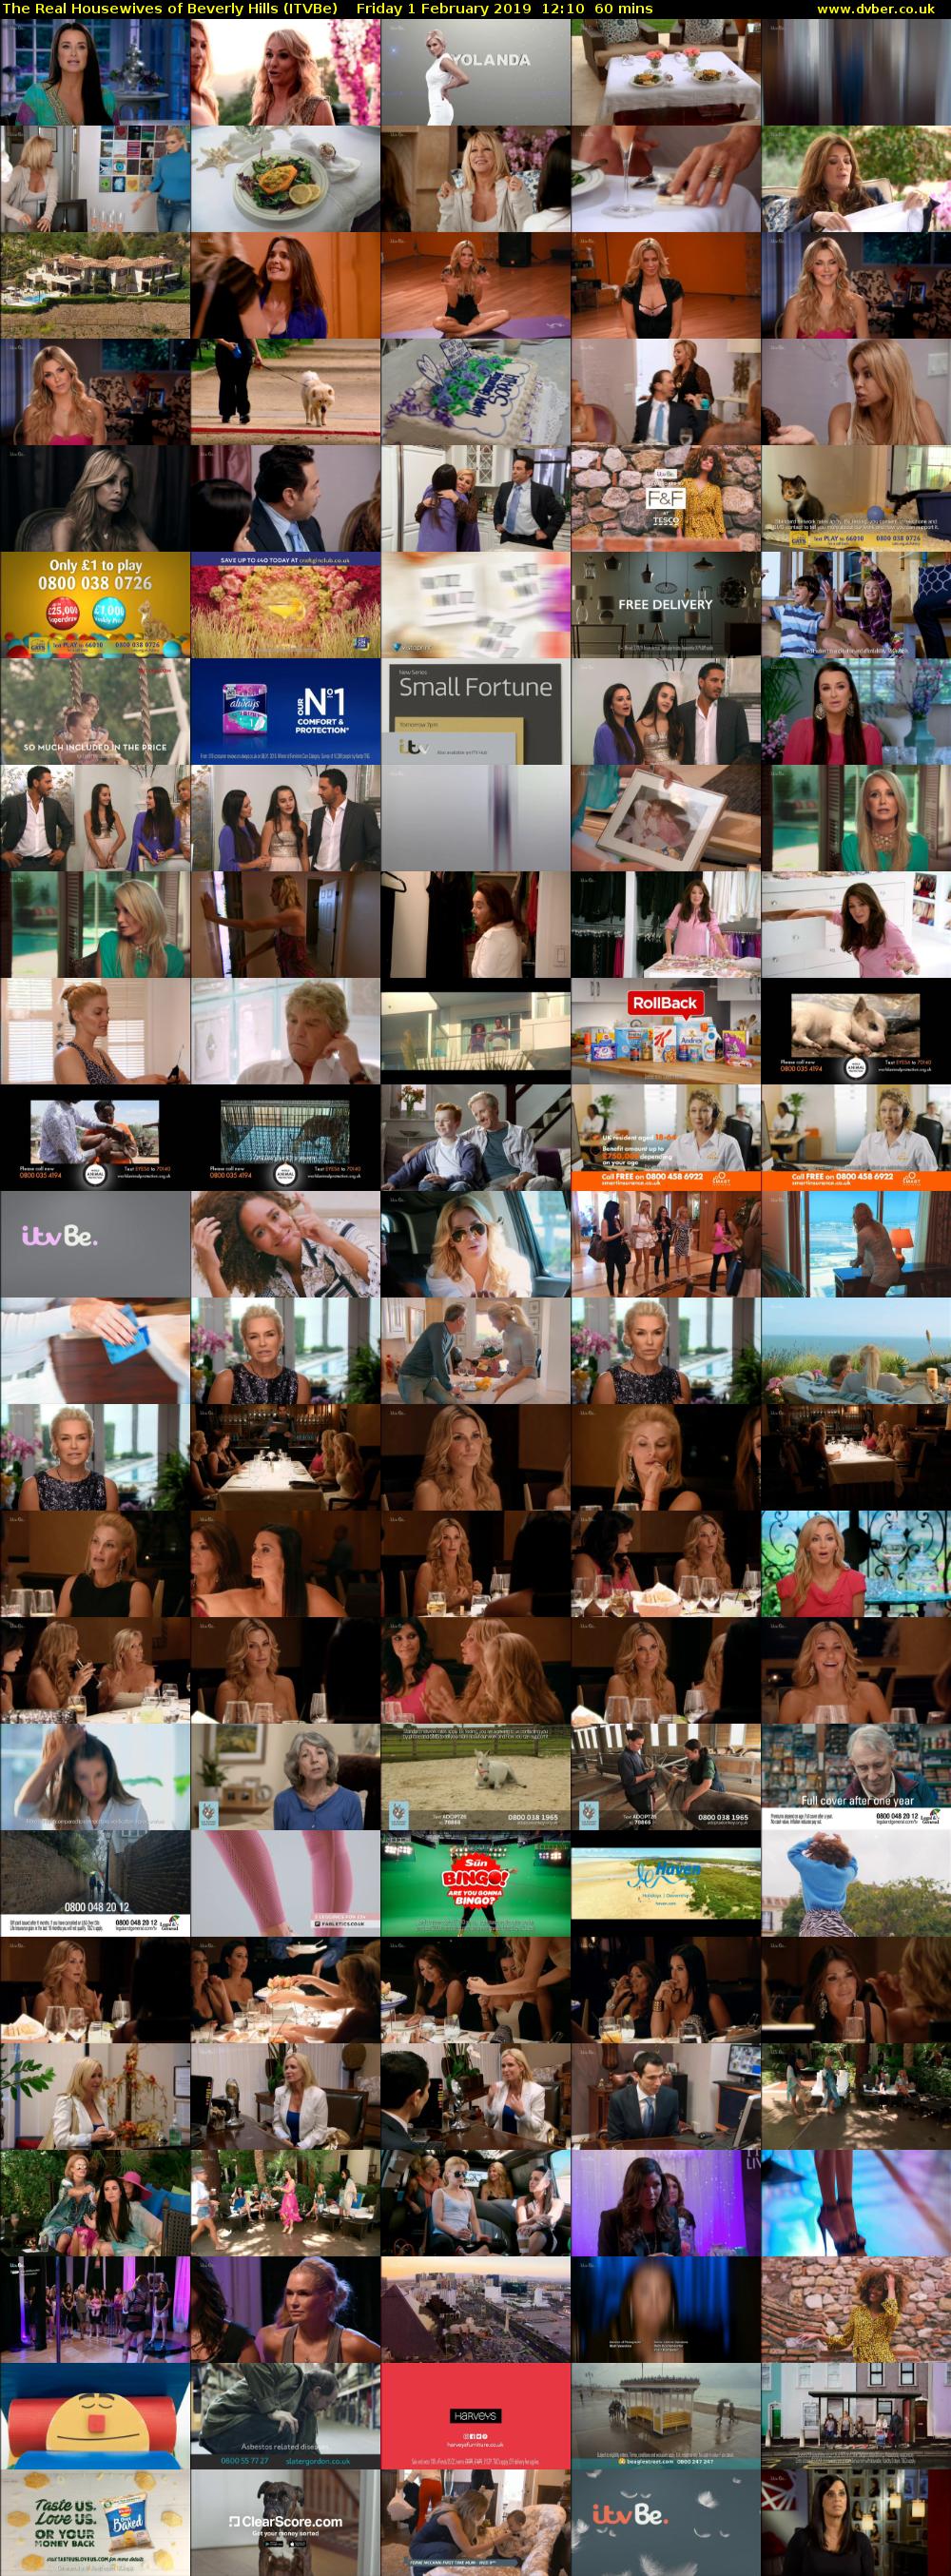 The Real Housewives of Beverly Hills (ITVBe) Friday 1 February 2019 12:10 - 13:10